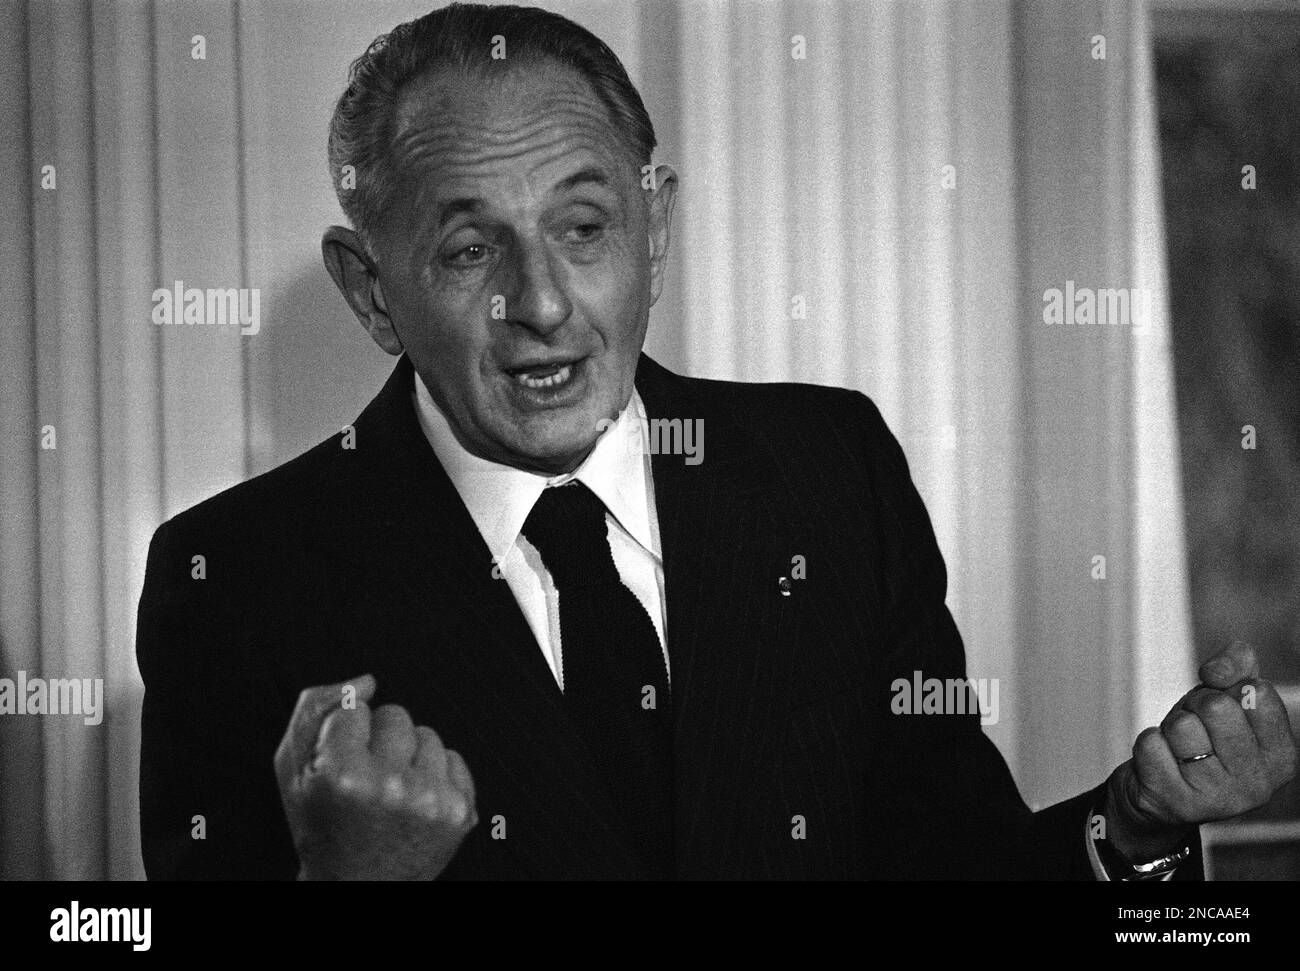 General Marcel Bigeard, known as Bruno, Secretary for the Ministry of Defense in France speaks at an Anglo-American press conference lunch on Jan. 13, 1976. (AP Photo/Michel Lipchitz) Stock Photo